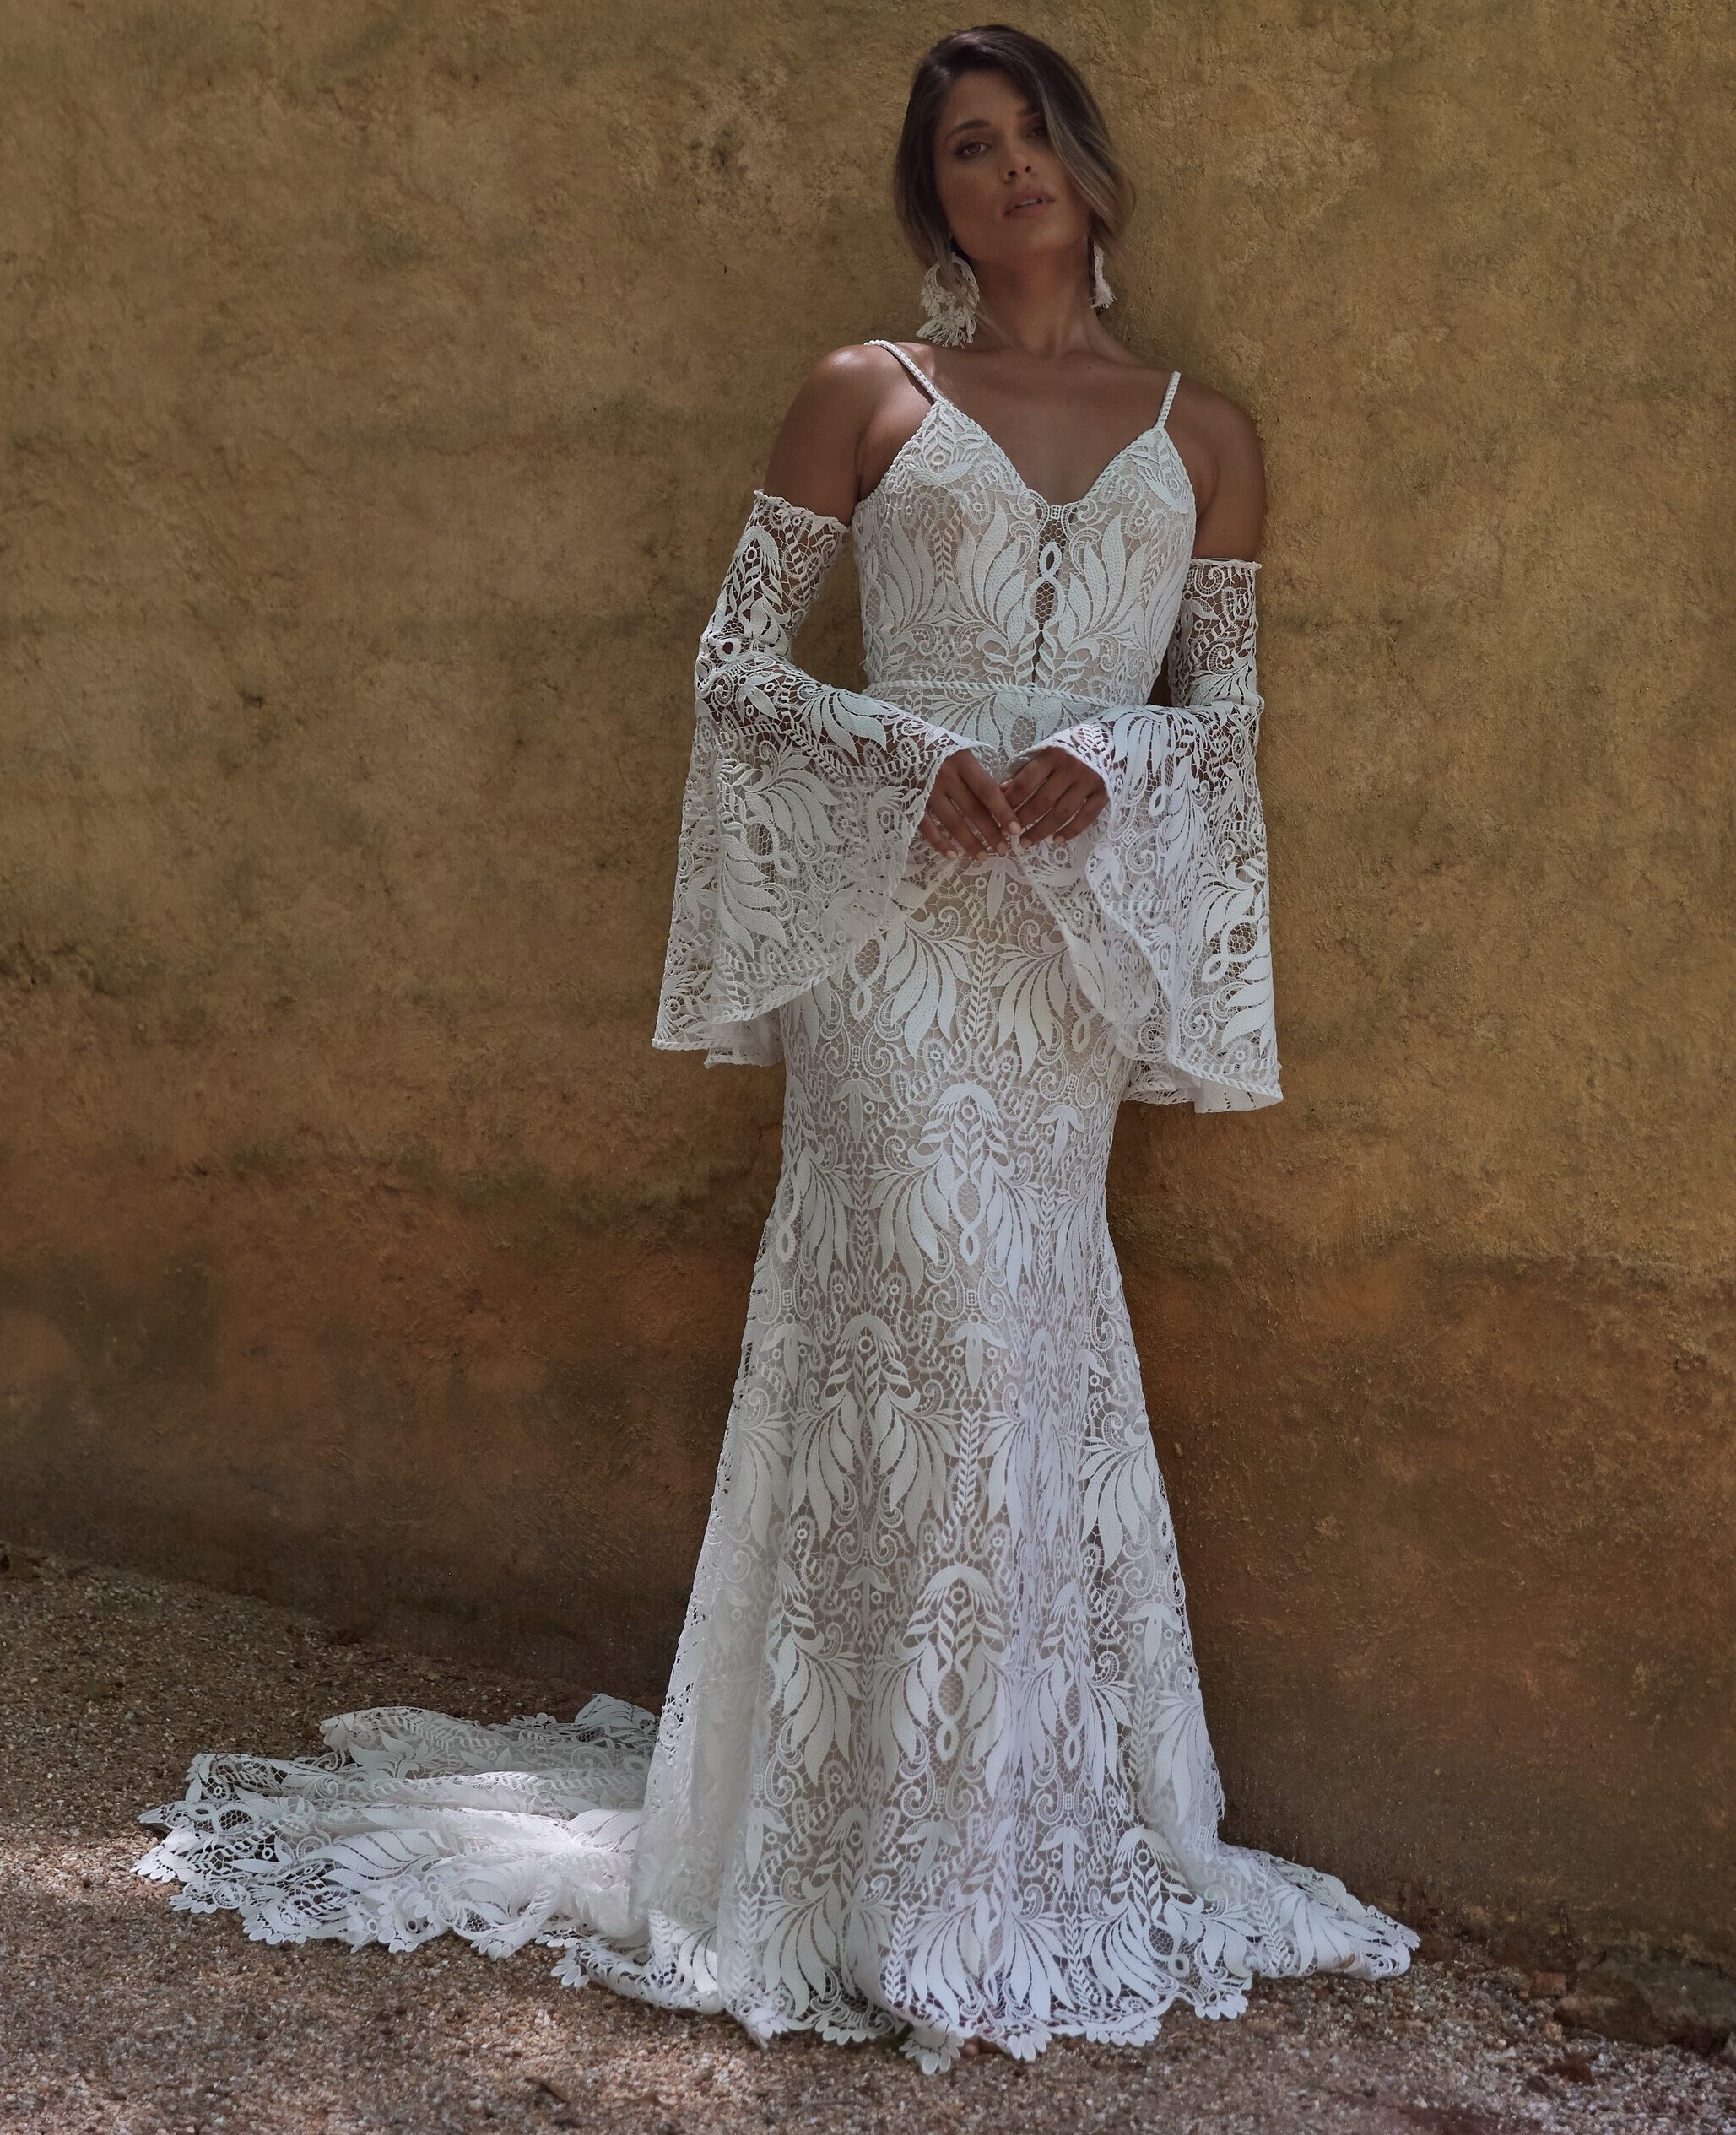 Introducing Evie Young Bridal